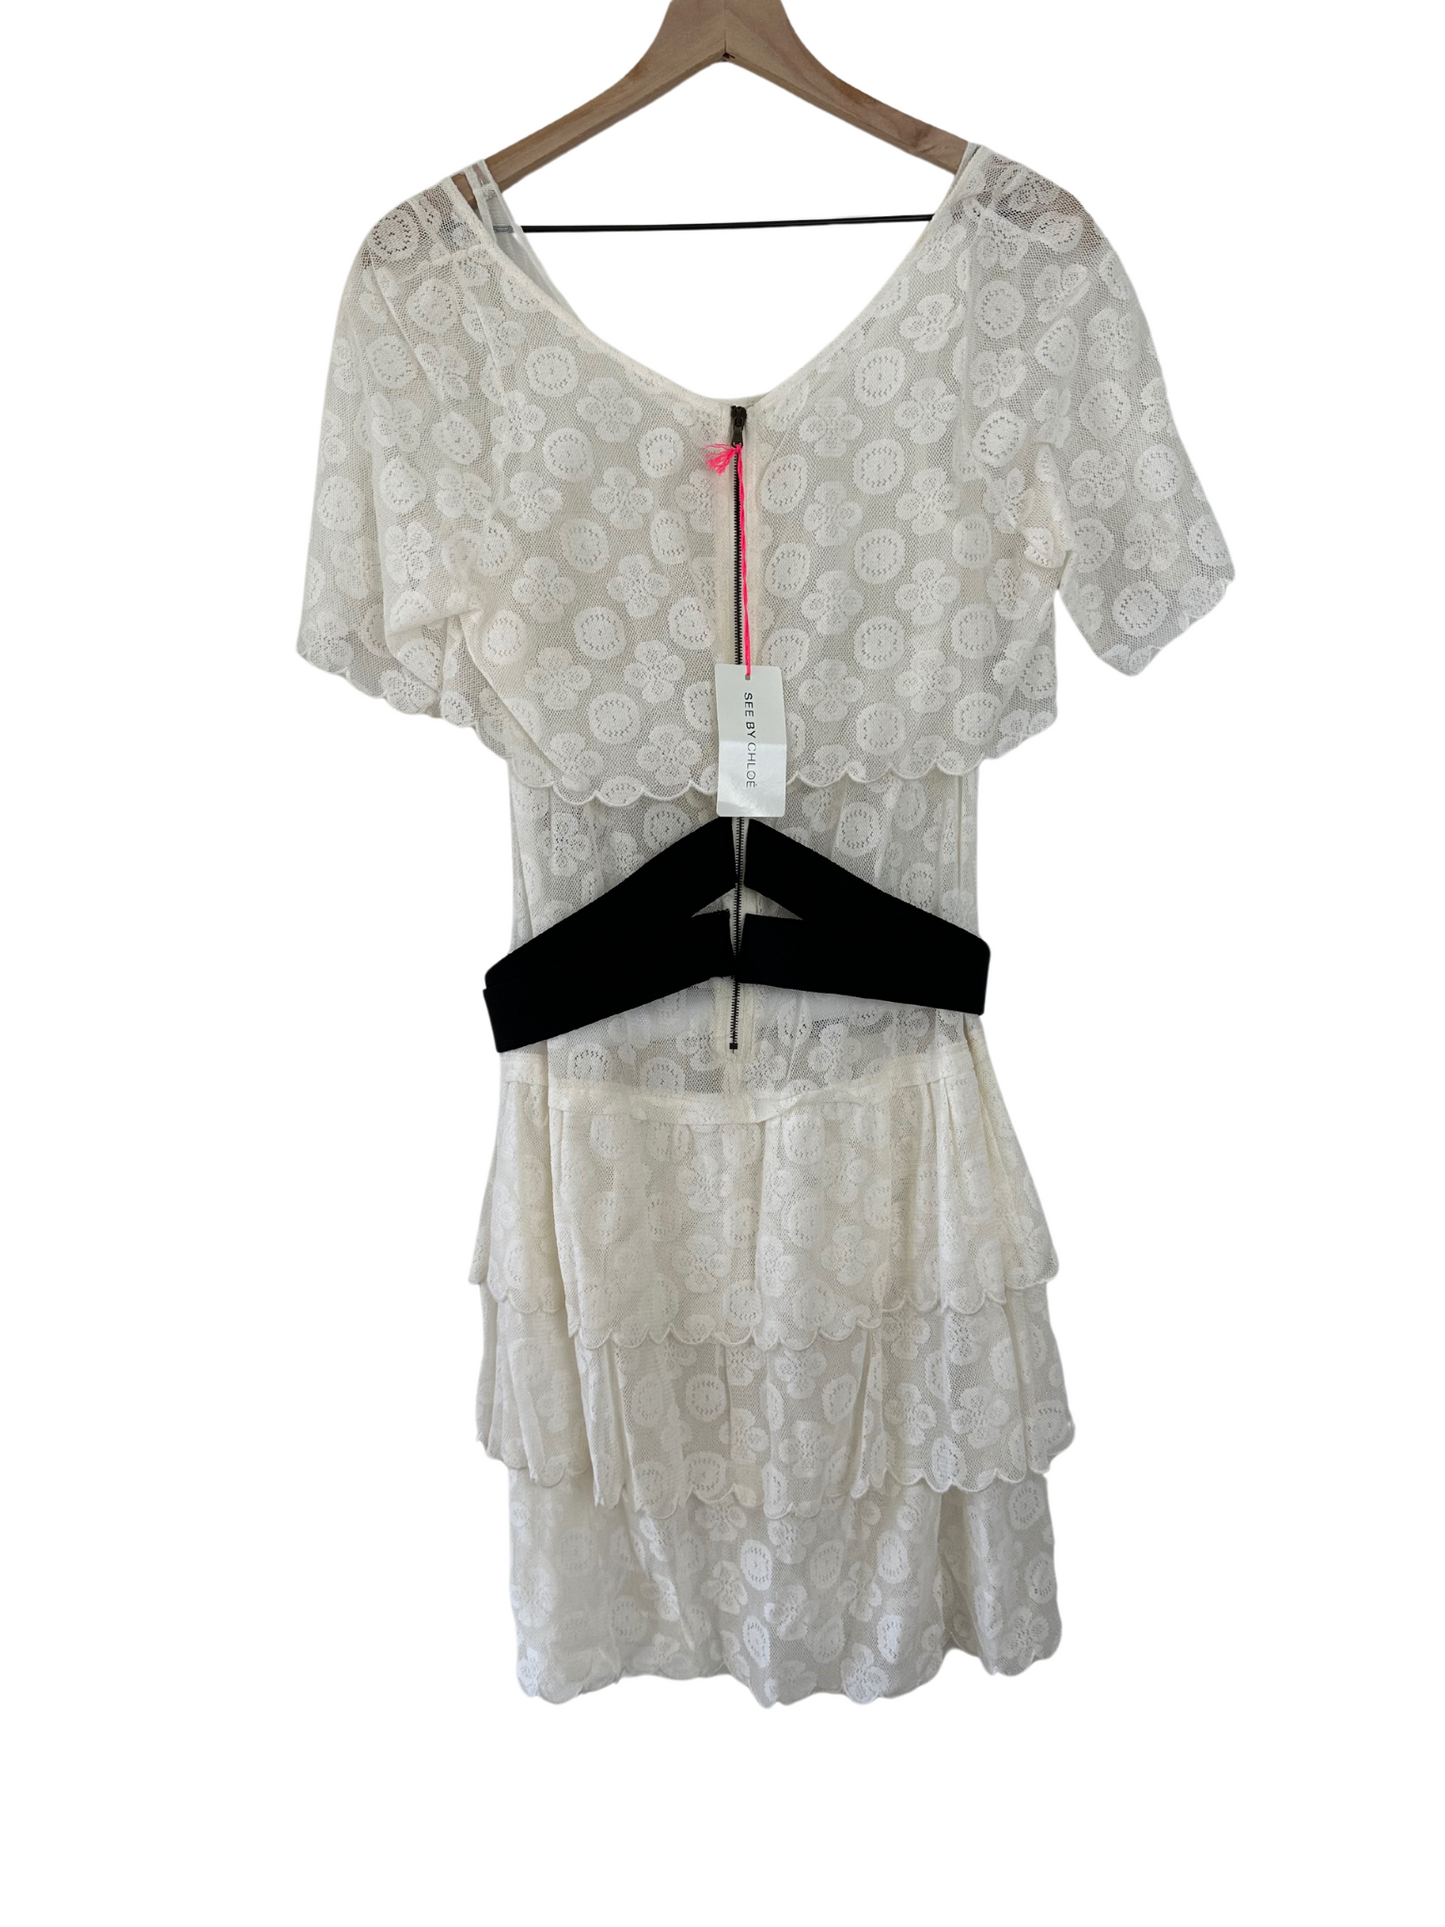 See by Chloé Cream Lace Dress Size 42